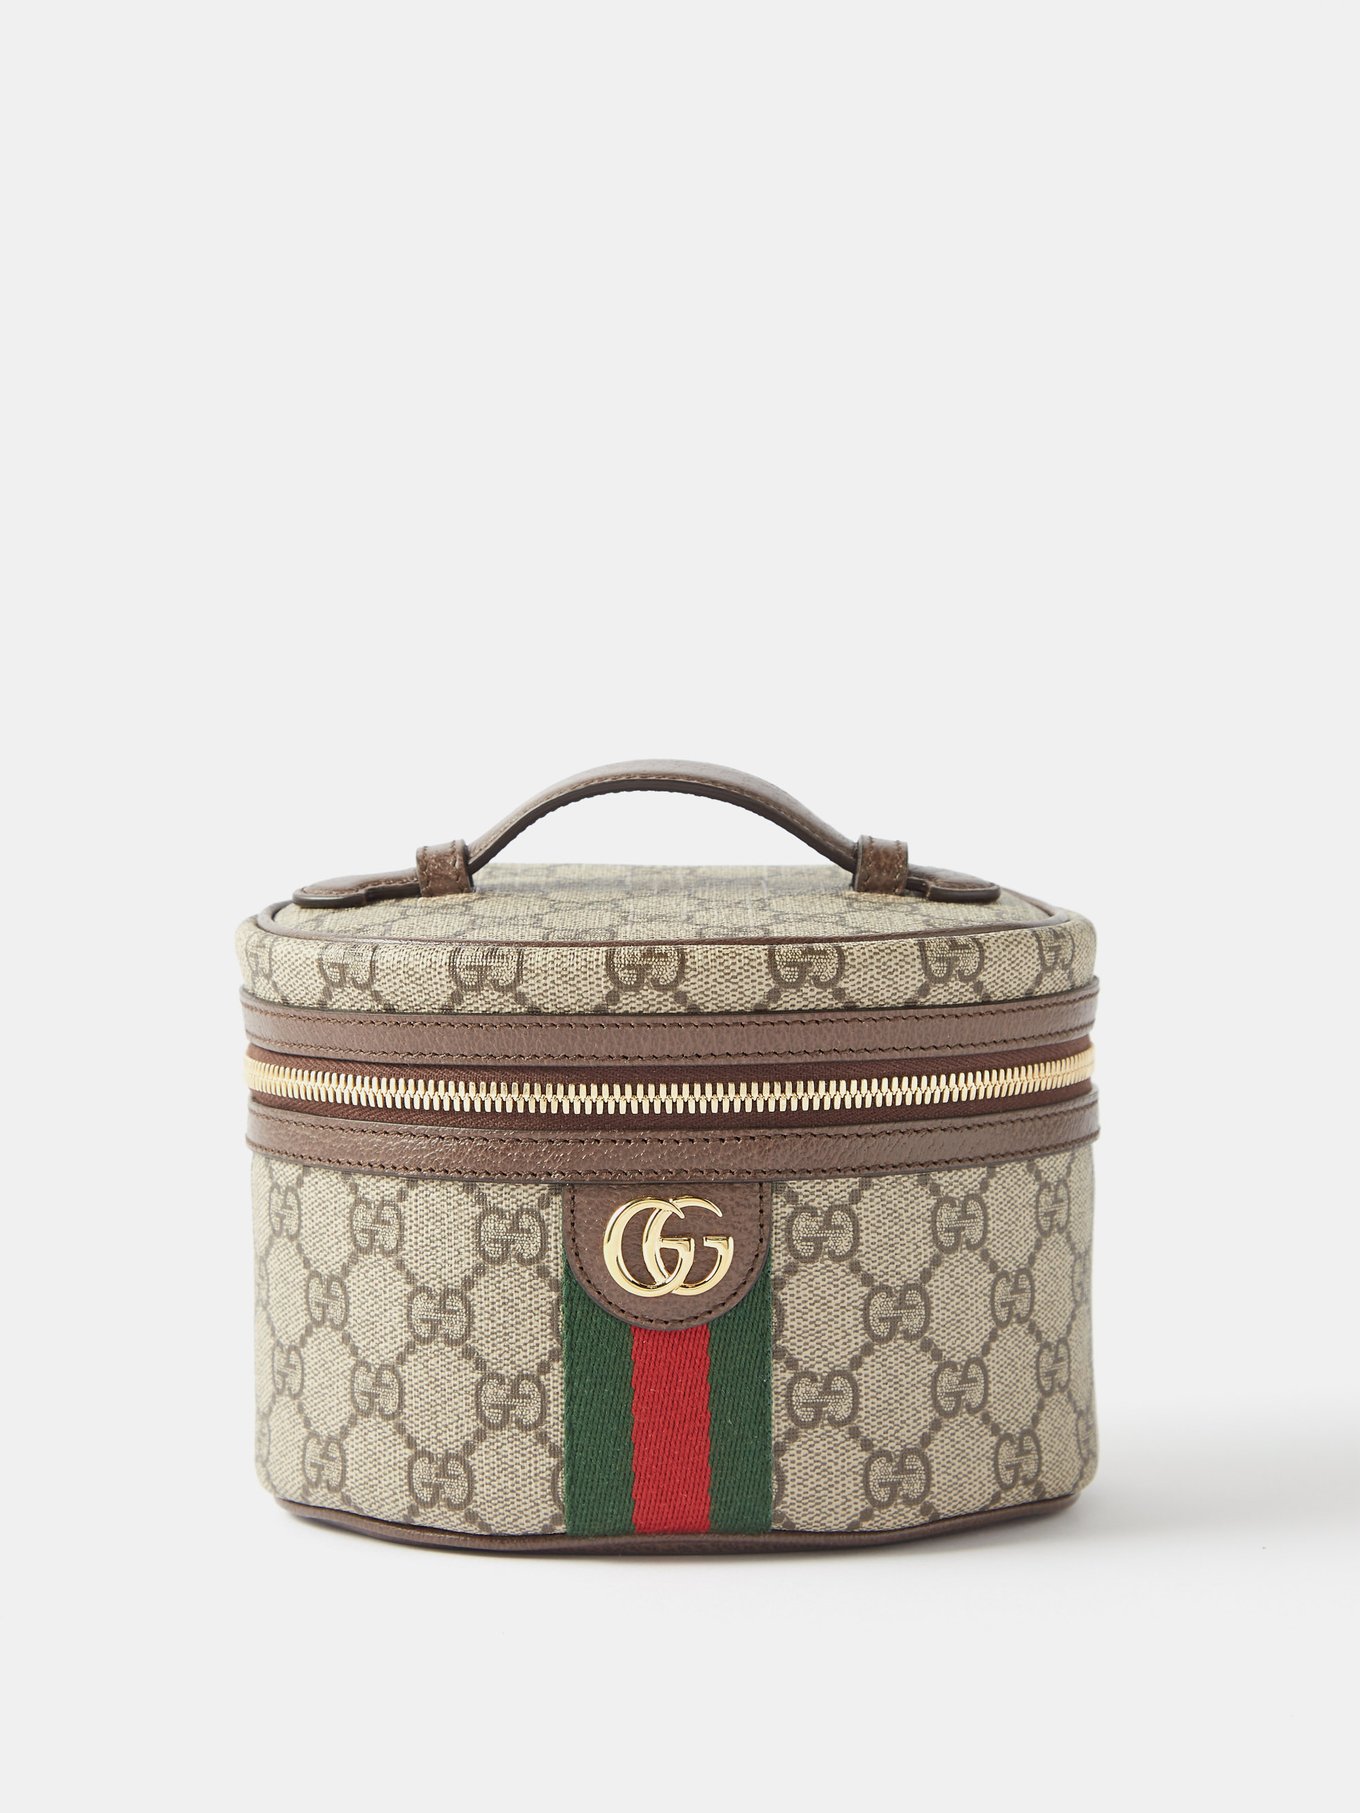 Ophidia GG toiletry case in grey and black Supreme